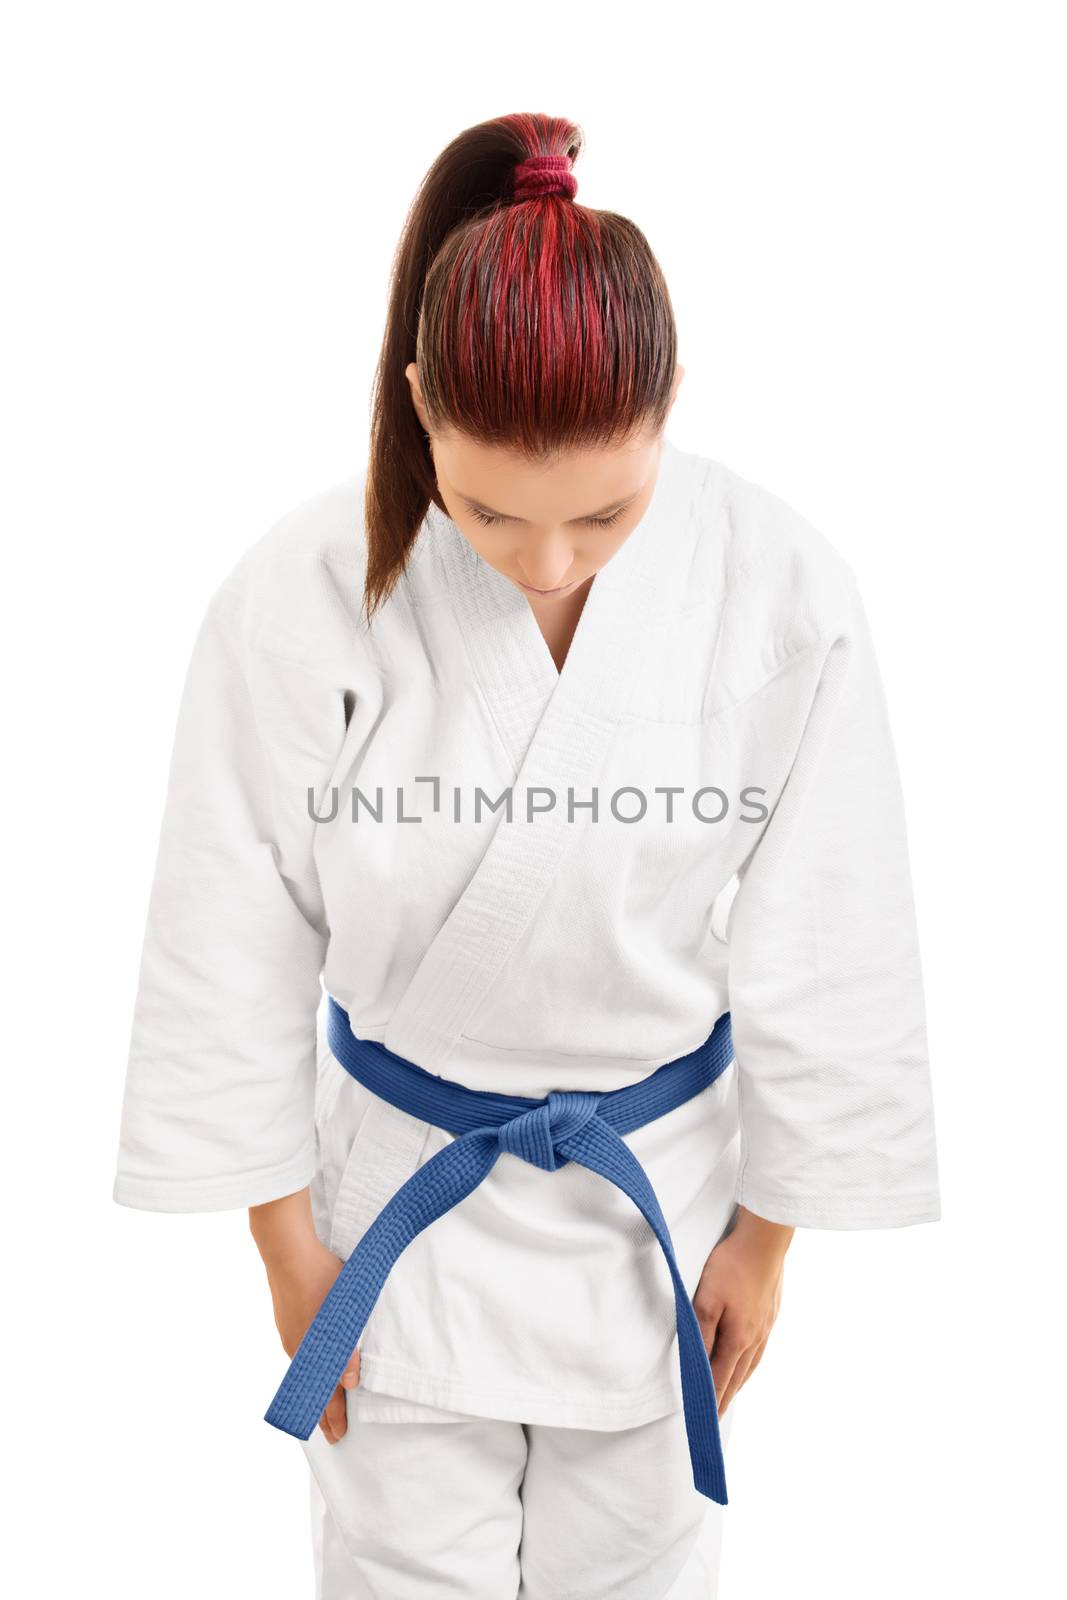 A portrait of a young girl in a white kimono with blue belt bowing, isolated on white background.